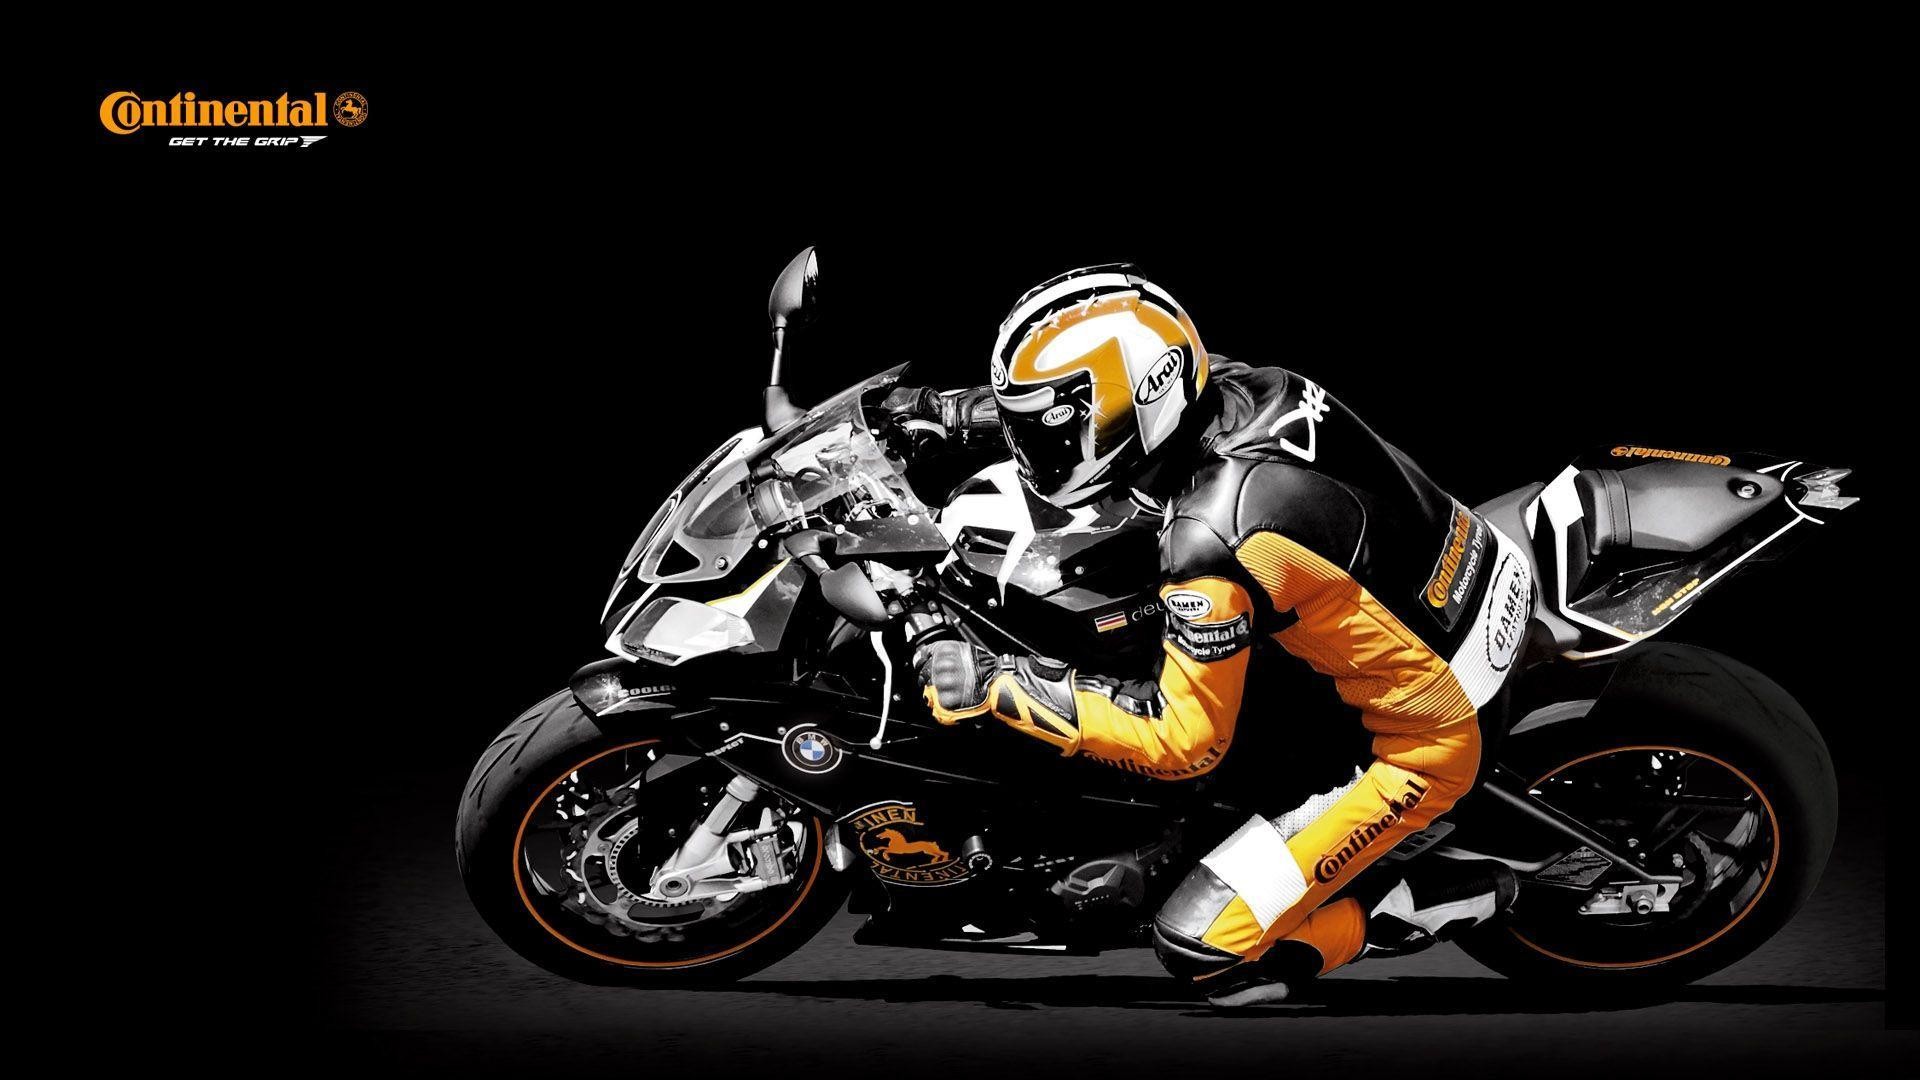 1920x1080 118 bmw motorcycle wallpaper bmw s1000rr contisportattack 2 fhd